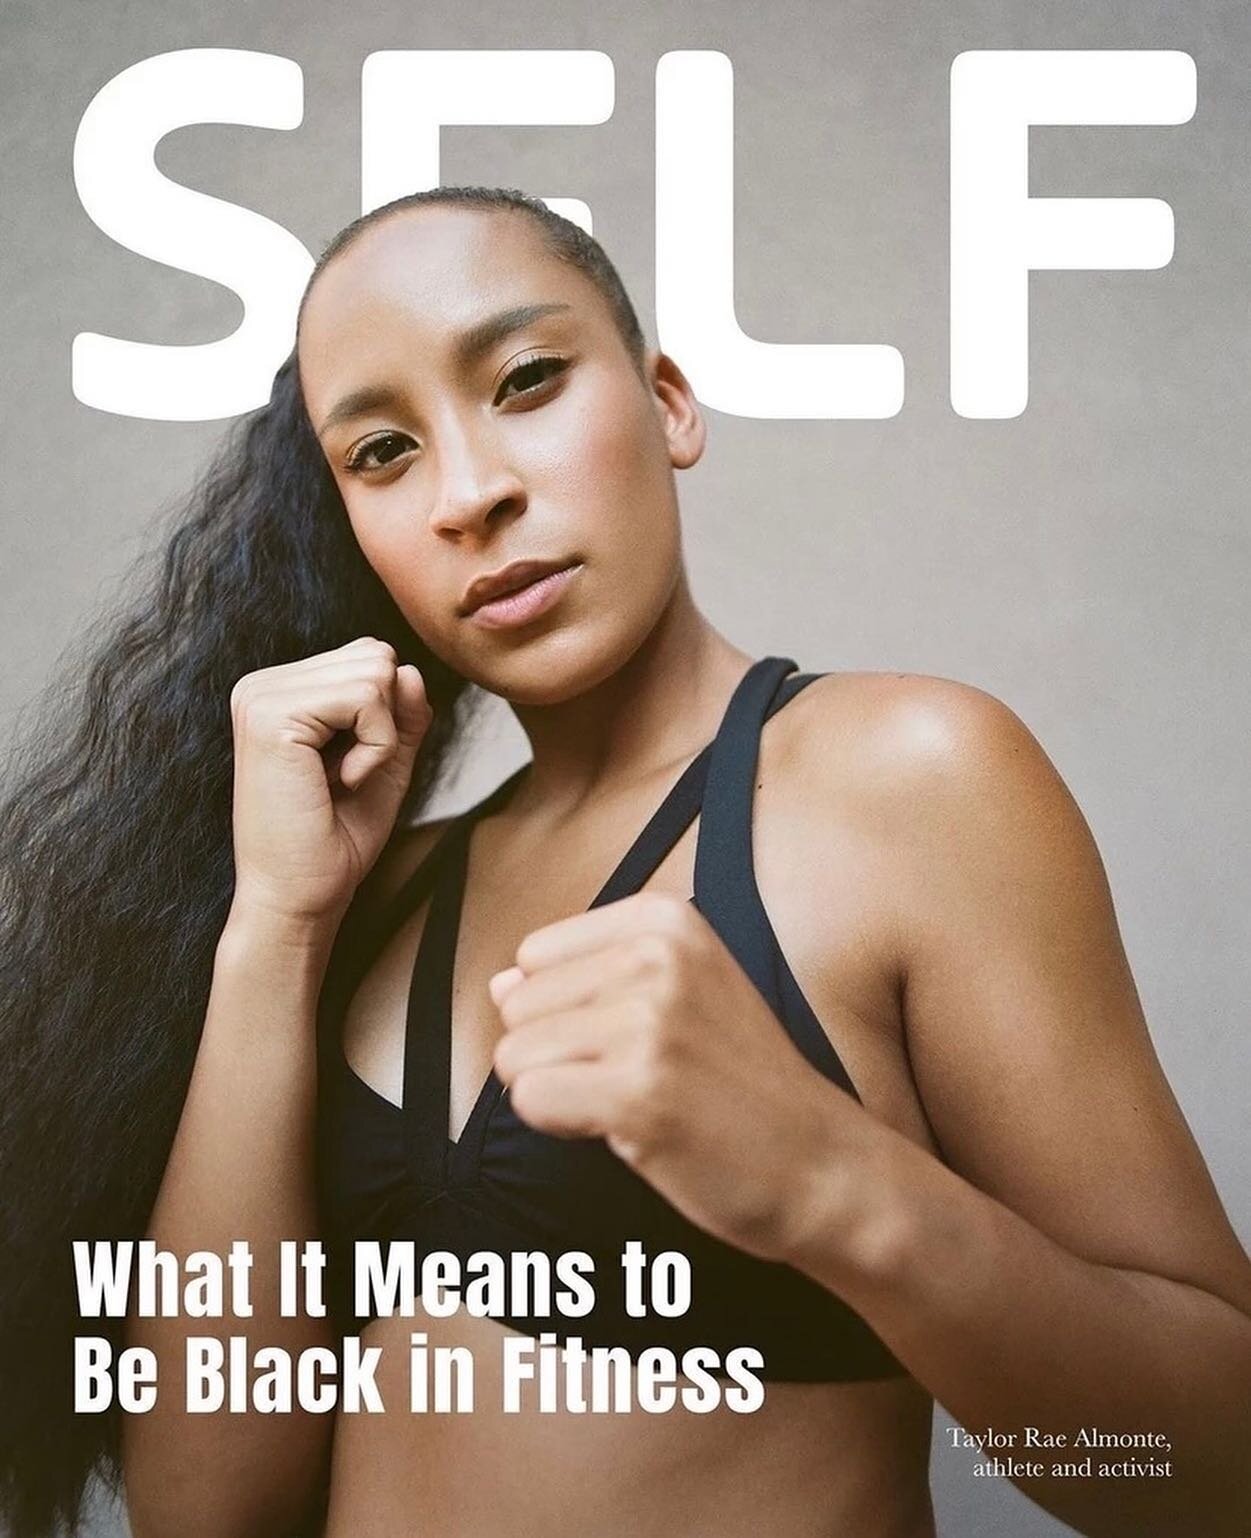 #creativesatsociety
Makeup Artist Eloria Michelle @eloriamichelle
featured in @selfmagazine
&bull;
With Taylor Rae Almonte @taylorraealmonte
athlete and activist
&bull;
Selena Watkins @selenawatkins
fitness entrepreneur and professional dancer
&bull;